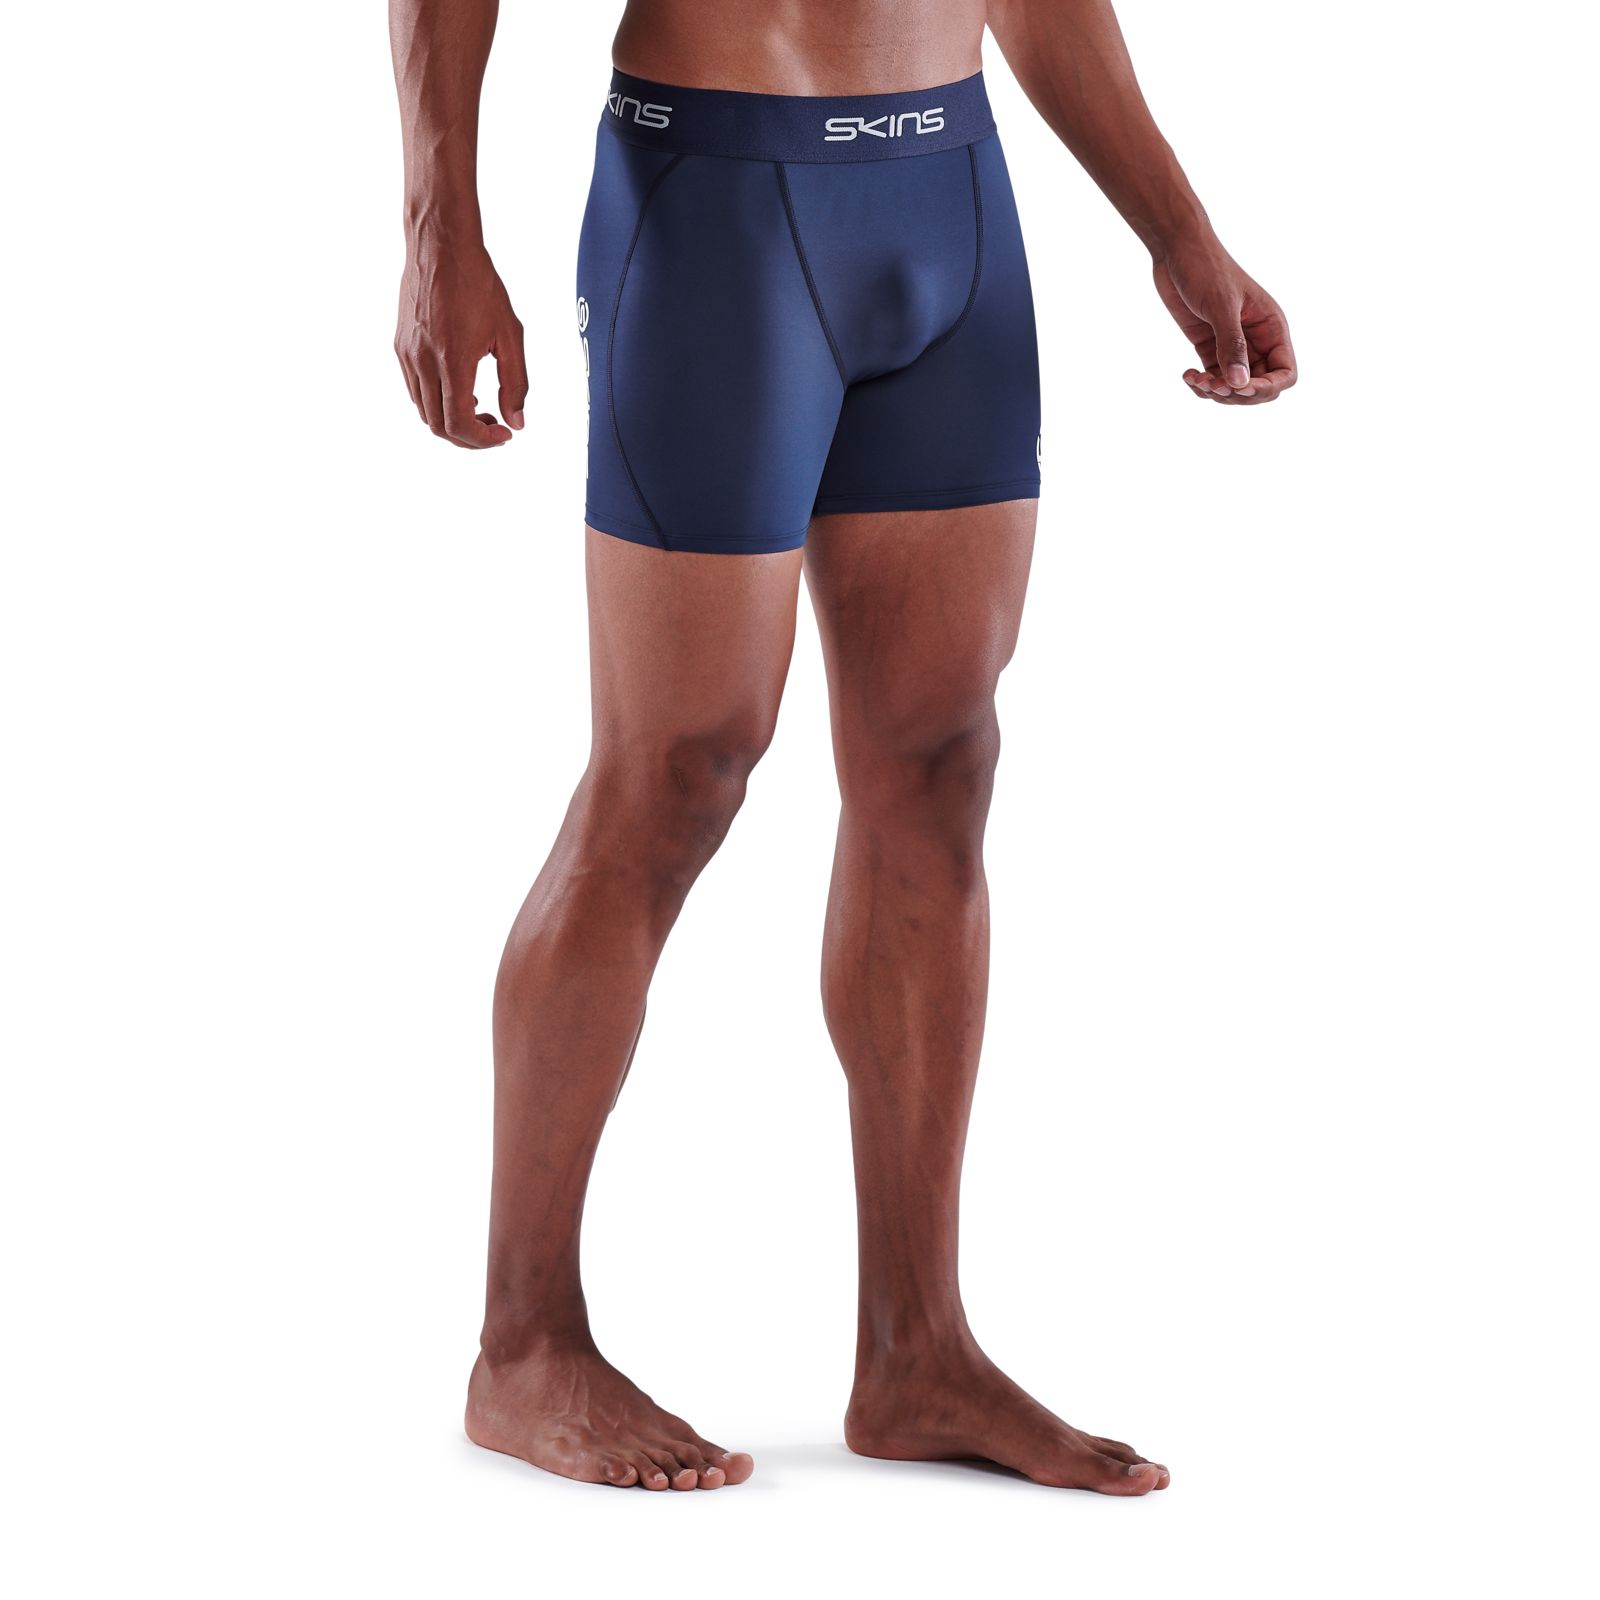 Skins Mens SKINS Activewear Nore 8" Shorts Pants Trousers Bottoms Navy Blue 